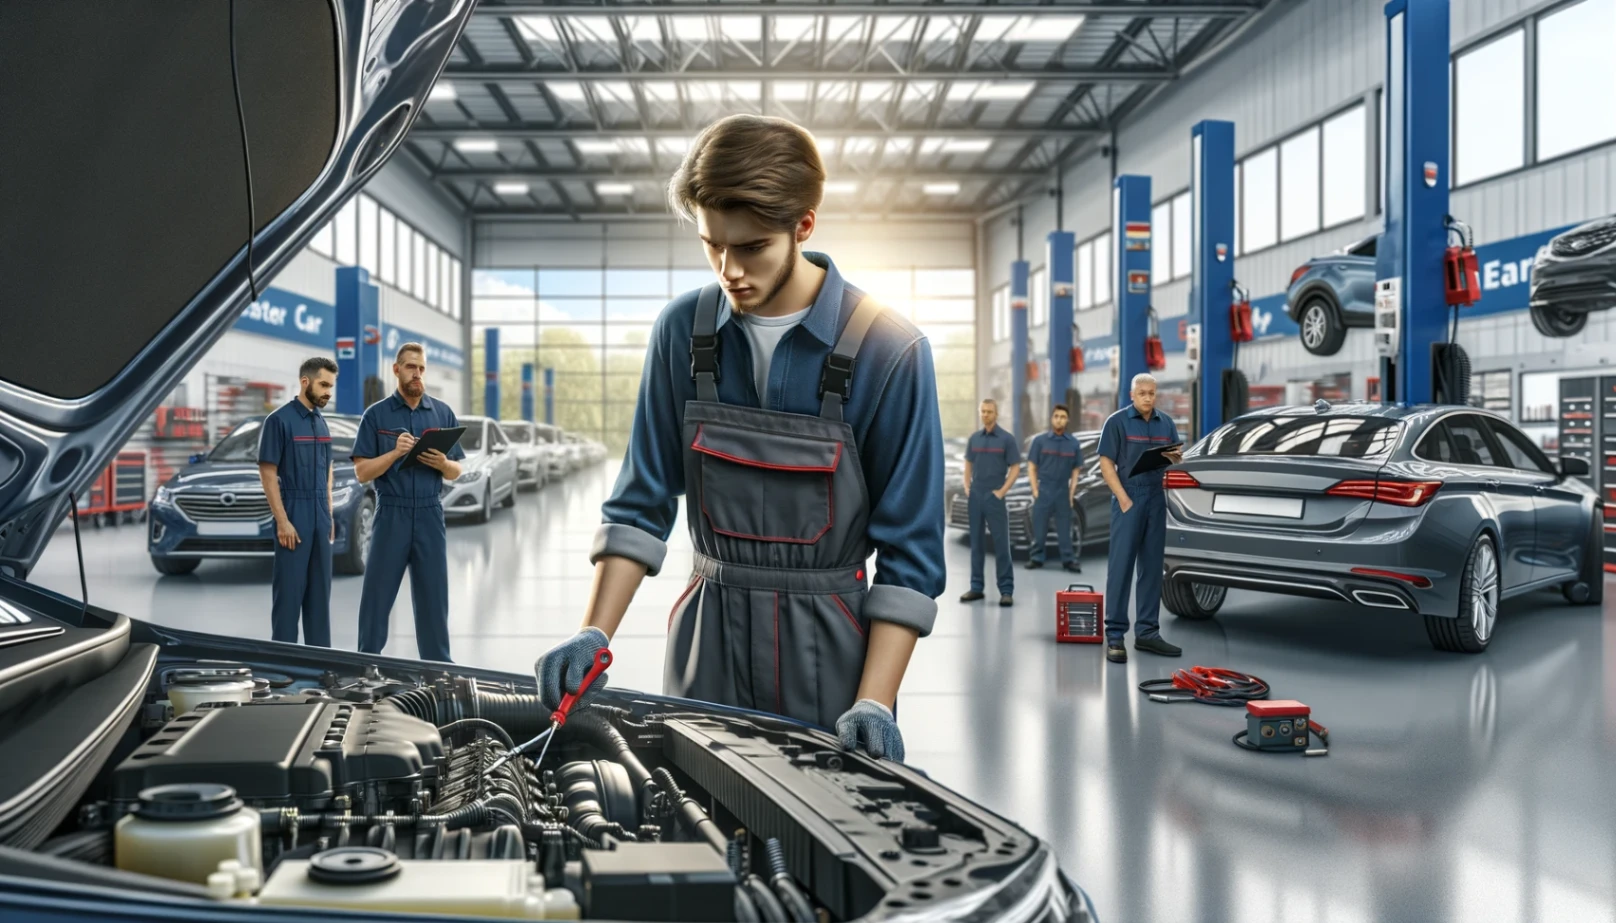 Entry-Level Jobs in Car Servicing: 15 Positions With Health Benefits & Paid Vacation